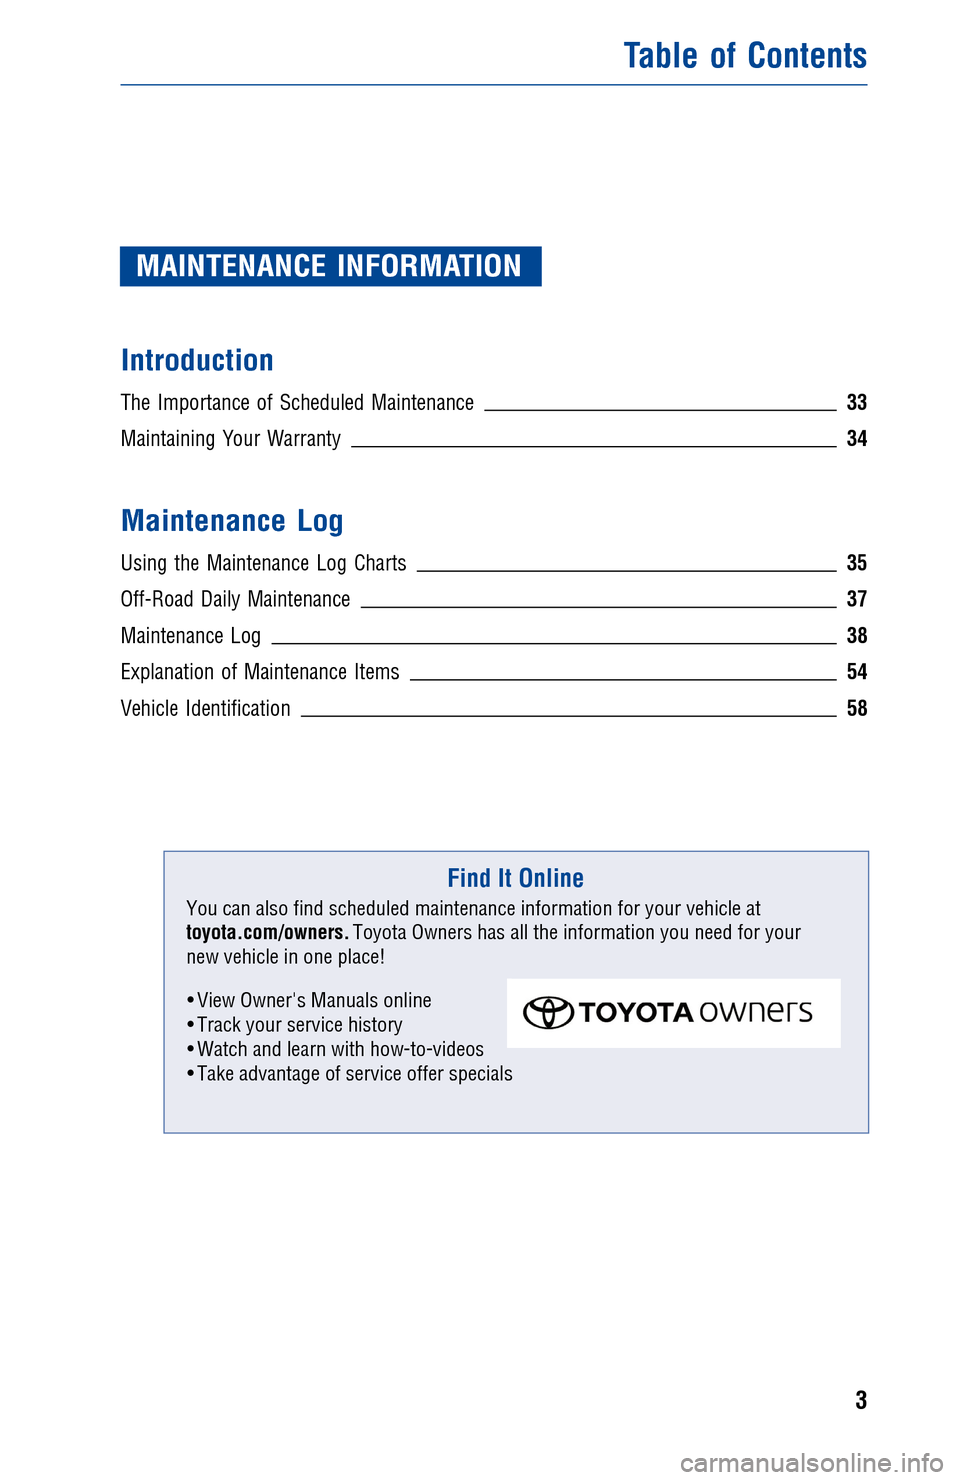 TOYOTA SEQUOIA 2016 2.G Warranty And Maintenance Guide MAINTENANCE INFORMATION
Introduction
The Importance of Scheduled Maintenance33
Maintaining Your Warranty34
Maintenance Log
Using the Maintenance Log Charts35
Off-Road Daily Maintenance37
Maintenance L